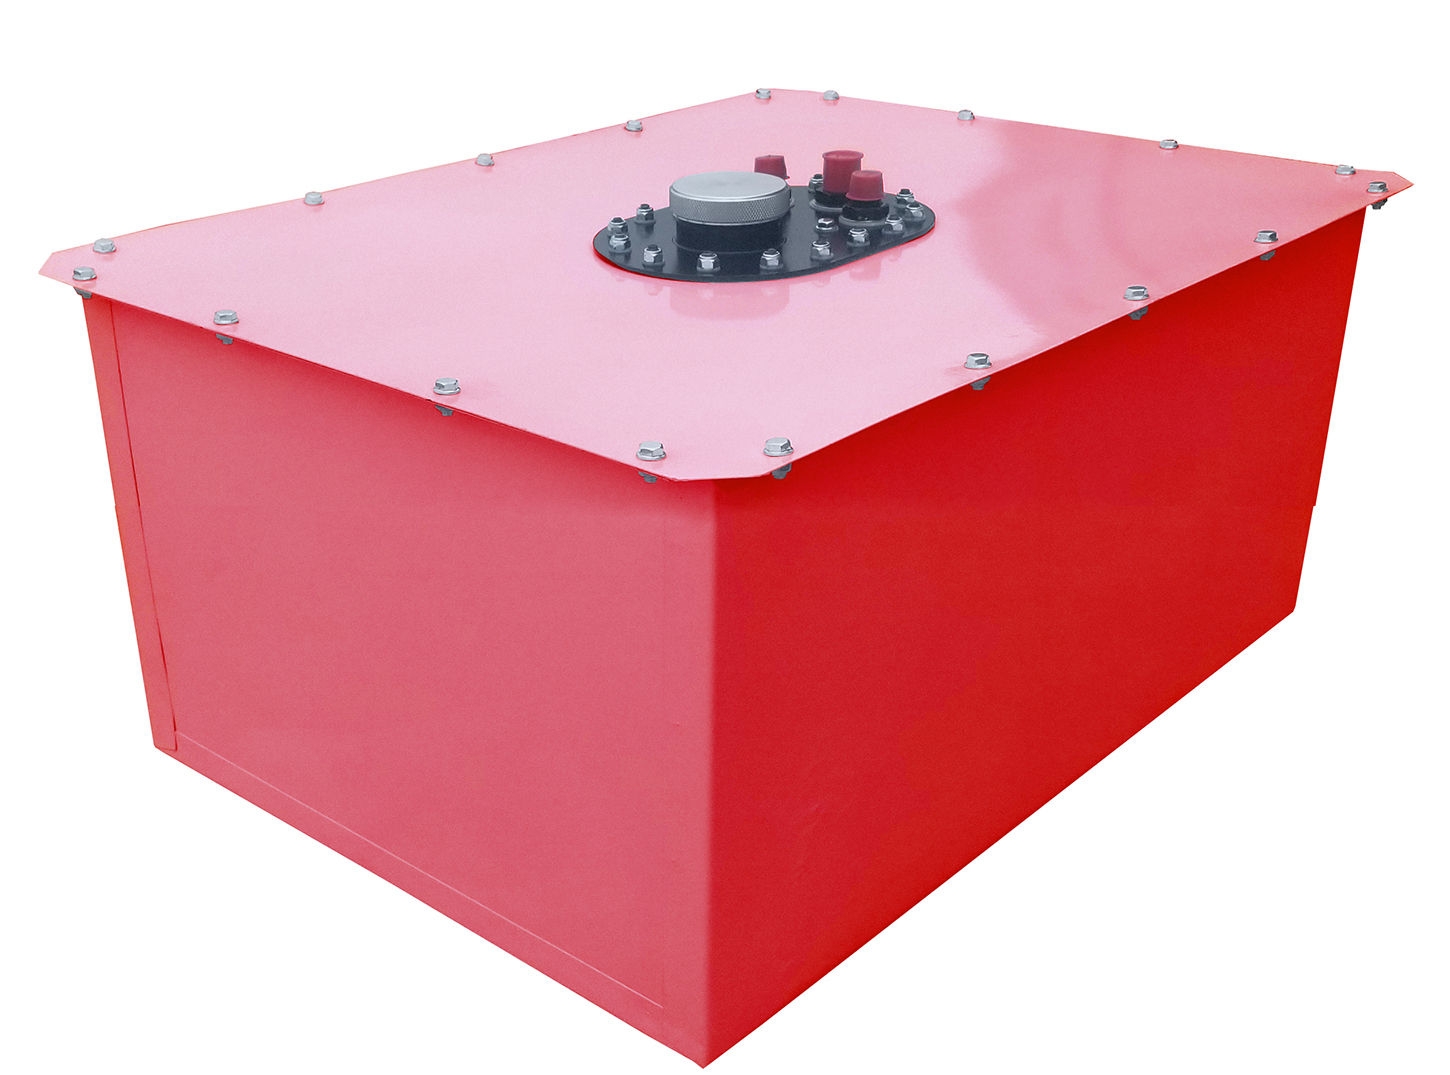 RCI 1162G-10 Fuel Cell and Can, Circle Track, 16 gal, 18-1/2 in Wide x 26 in Deep x 11-1/2 in Tall, 10 AN Male Outlet, 8 AN Male Vent, Steel, Red Powder Coat, Each